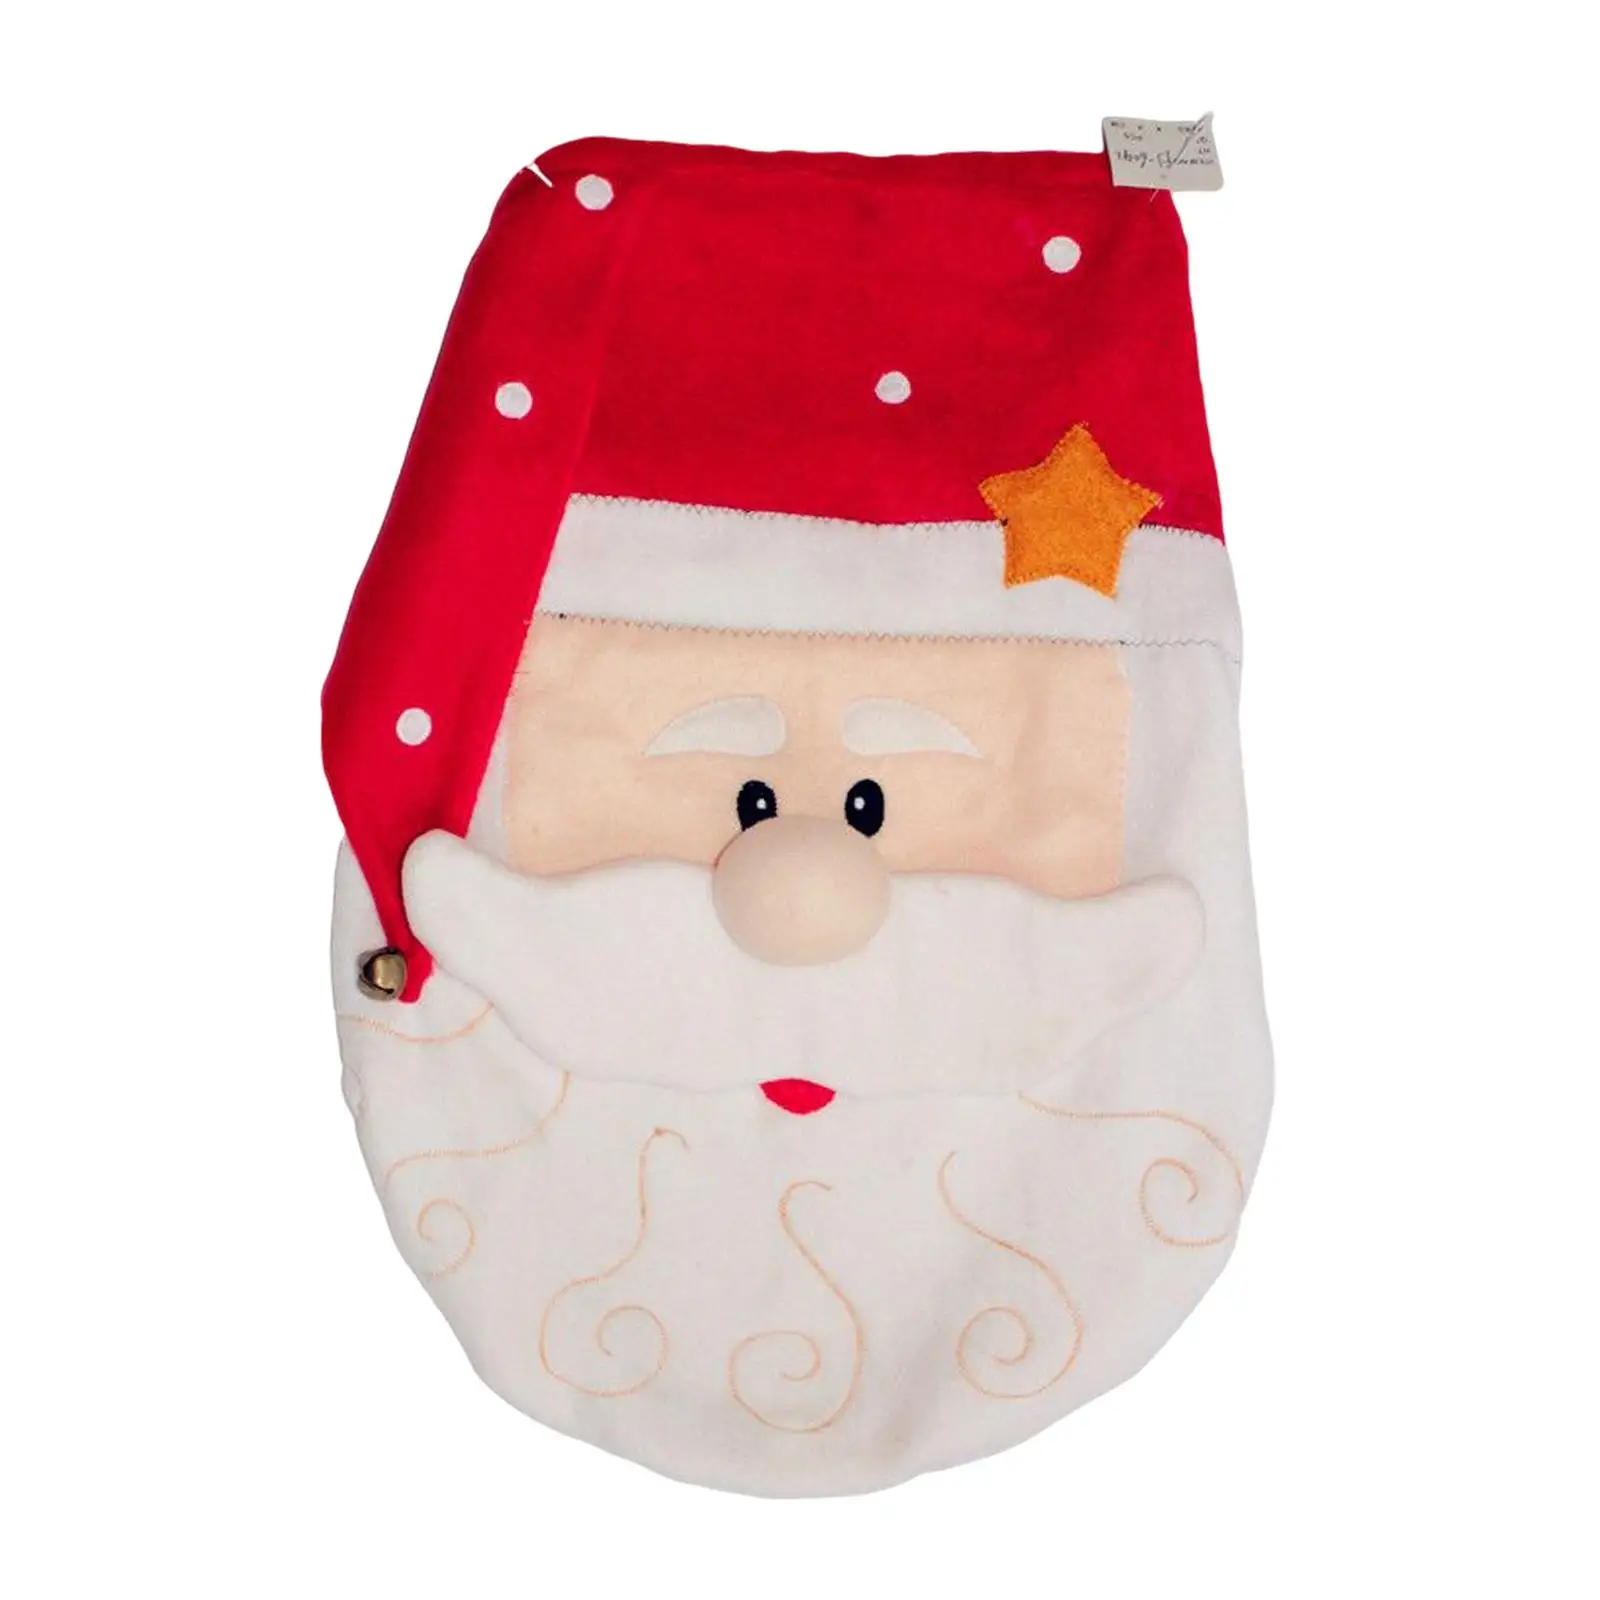 Cute Toilet Seat Cover Christmas Mat Ornament Red Supplies Lid Cover for Bathroom Party Decoration House Festival